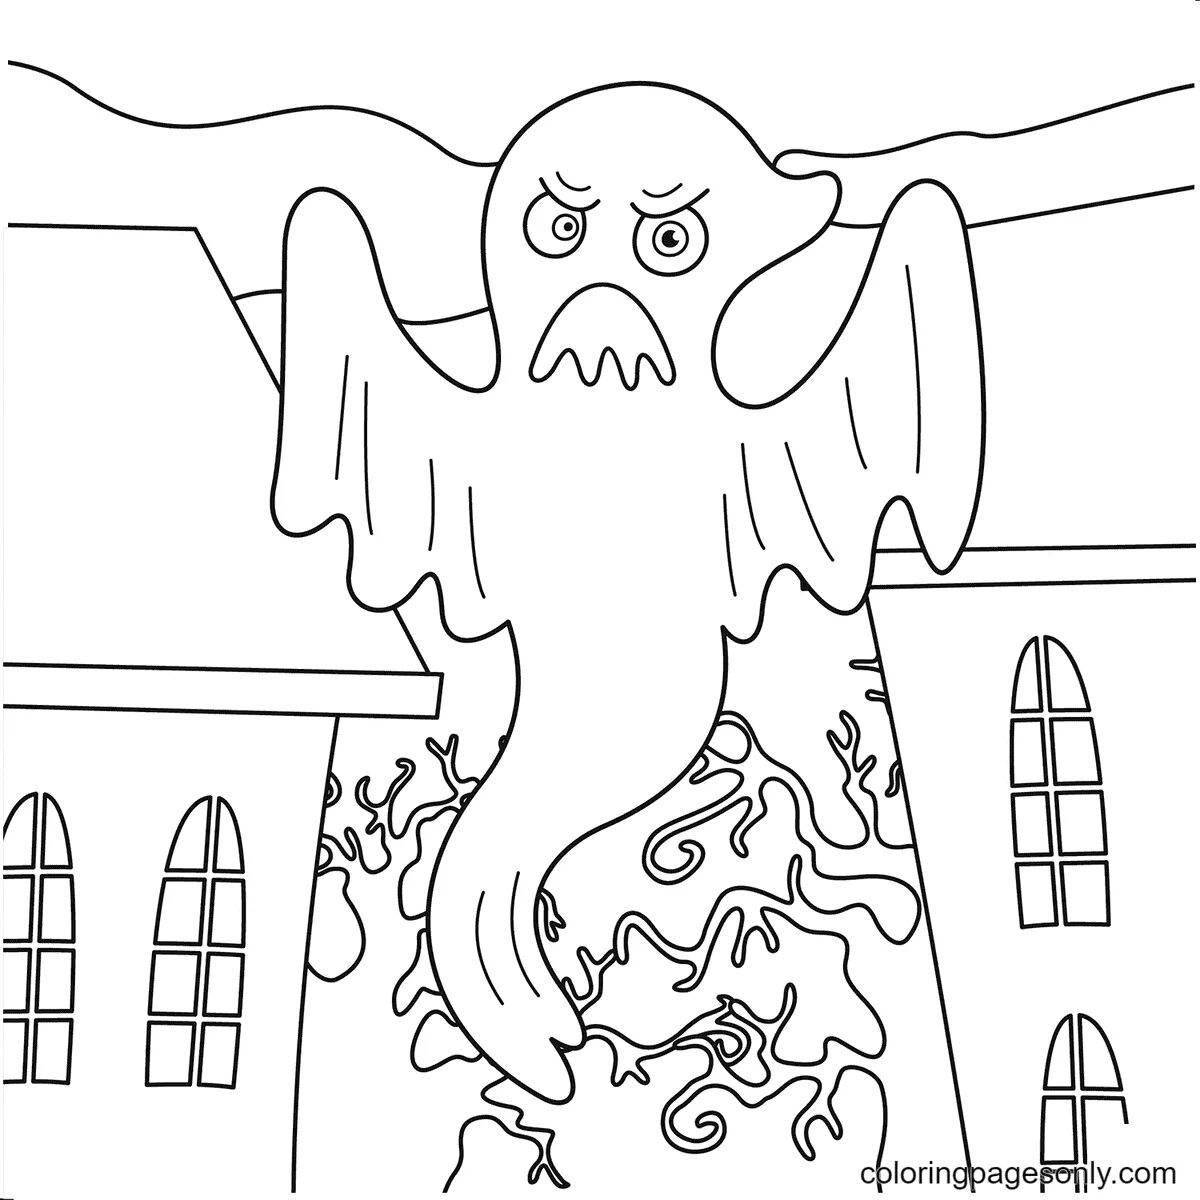 Fun ghost coloring for kids